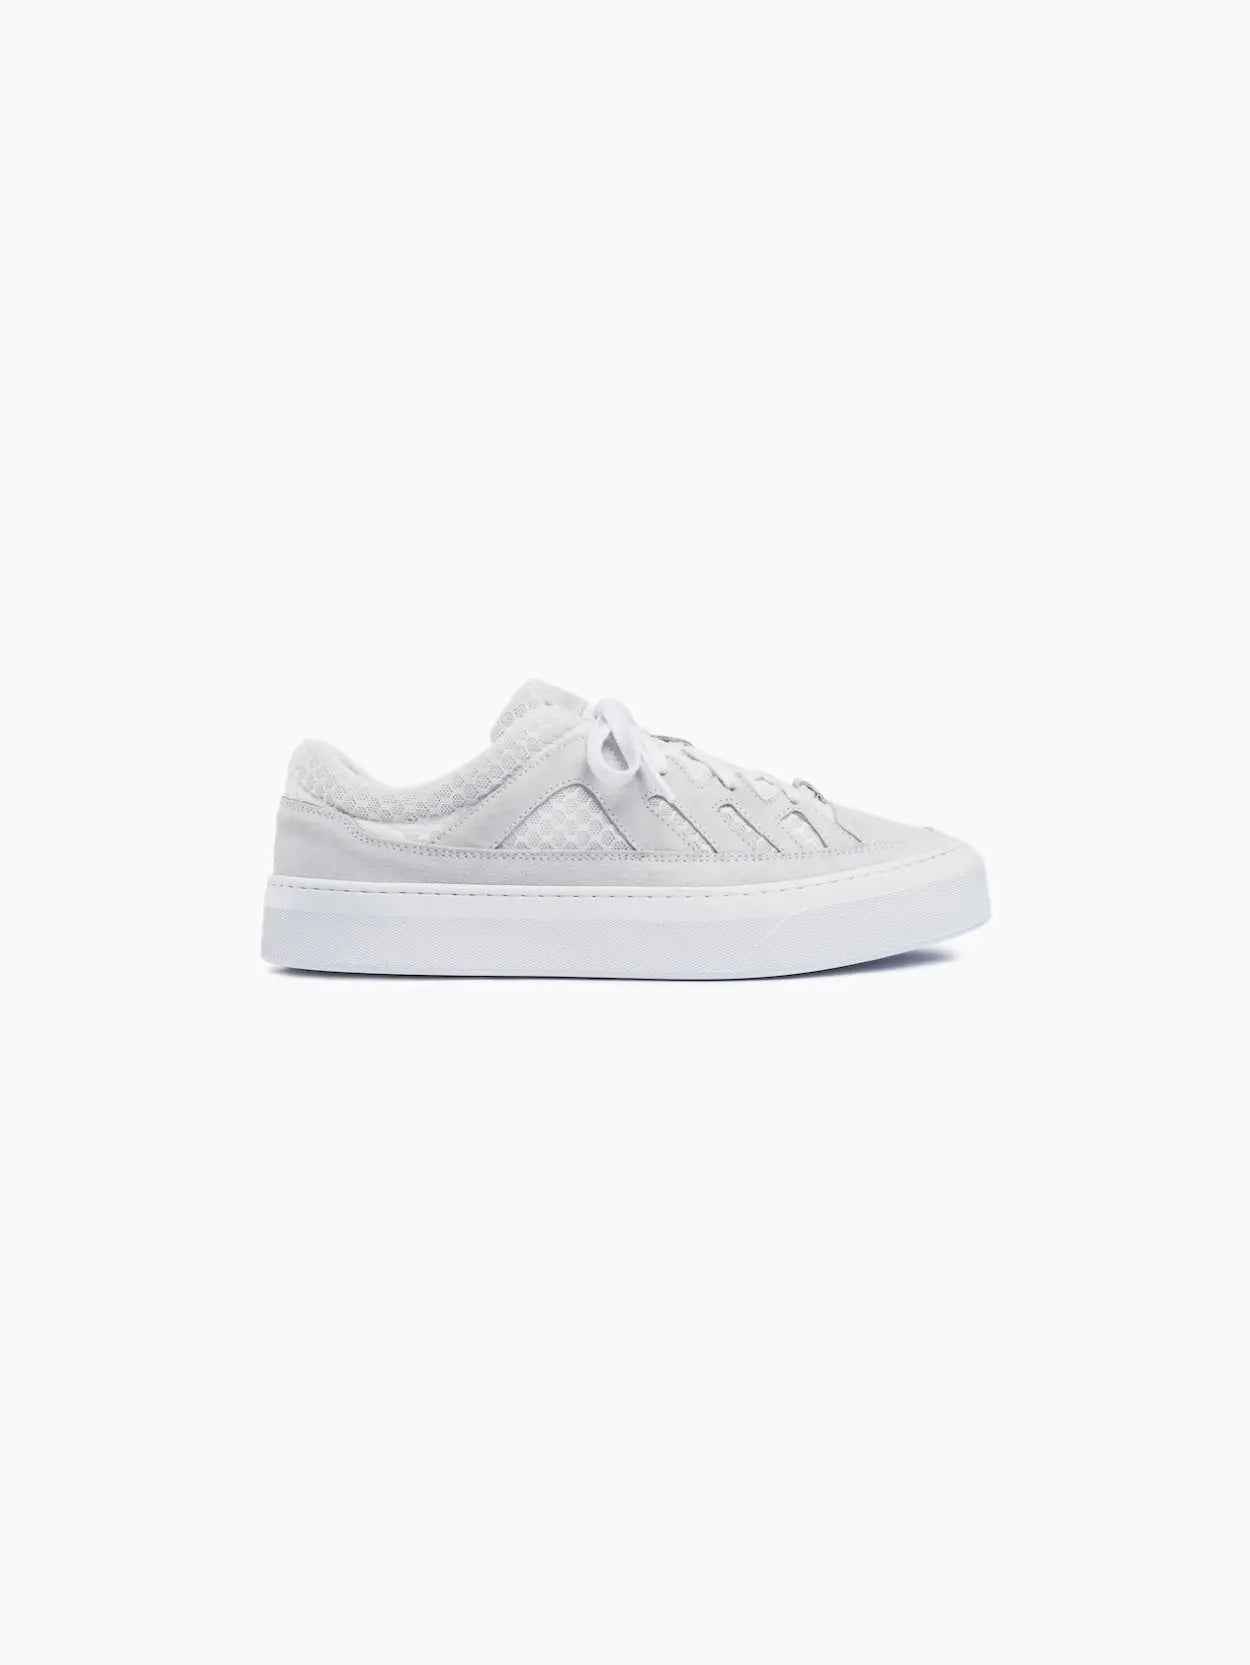 A side view of a single white low-top sneaker featuring a textured design with a cushioned collar and white laces. The shoe has a rubber sole and appears to be made from soft fabric material. Photographed against a white background, the Diemme Lonato Low White Mesh/White Suede is available at bassalstore in Barcelona.